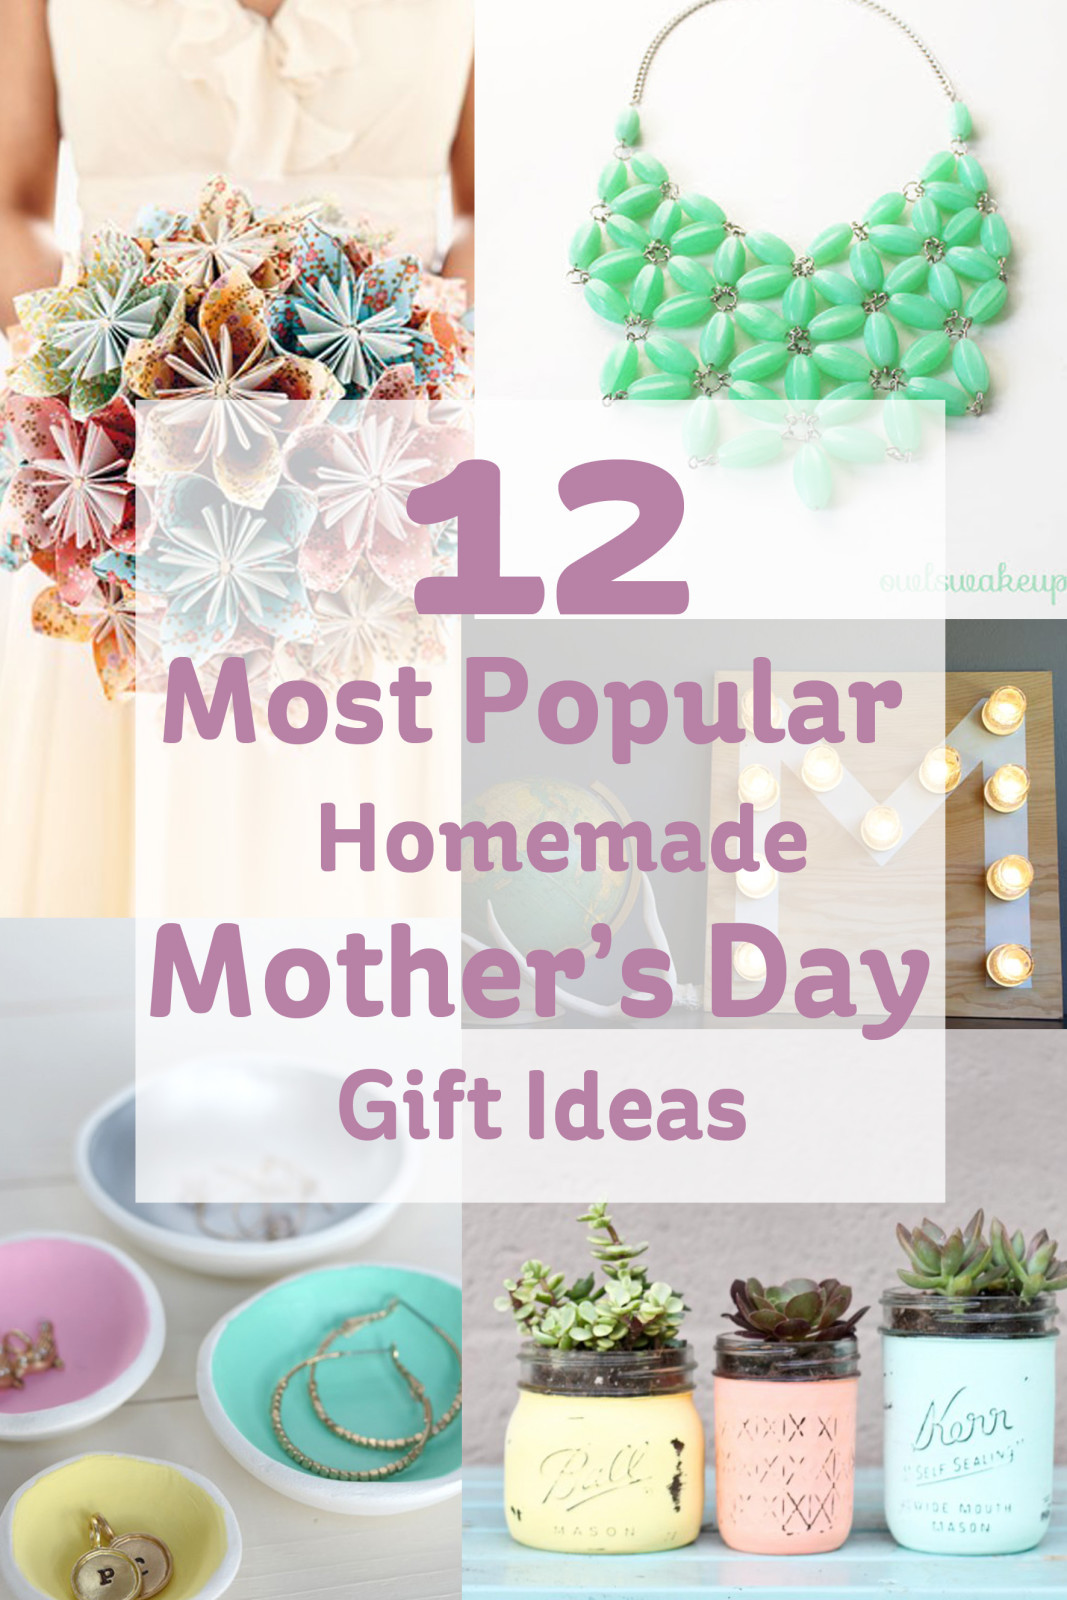 Mother'S Day Gift Ideas Homemade Crafts
 12 Most Popular Homemade Mother s Day Gift Ideas